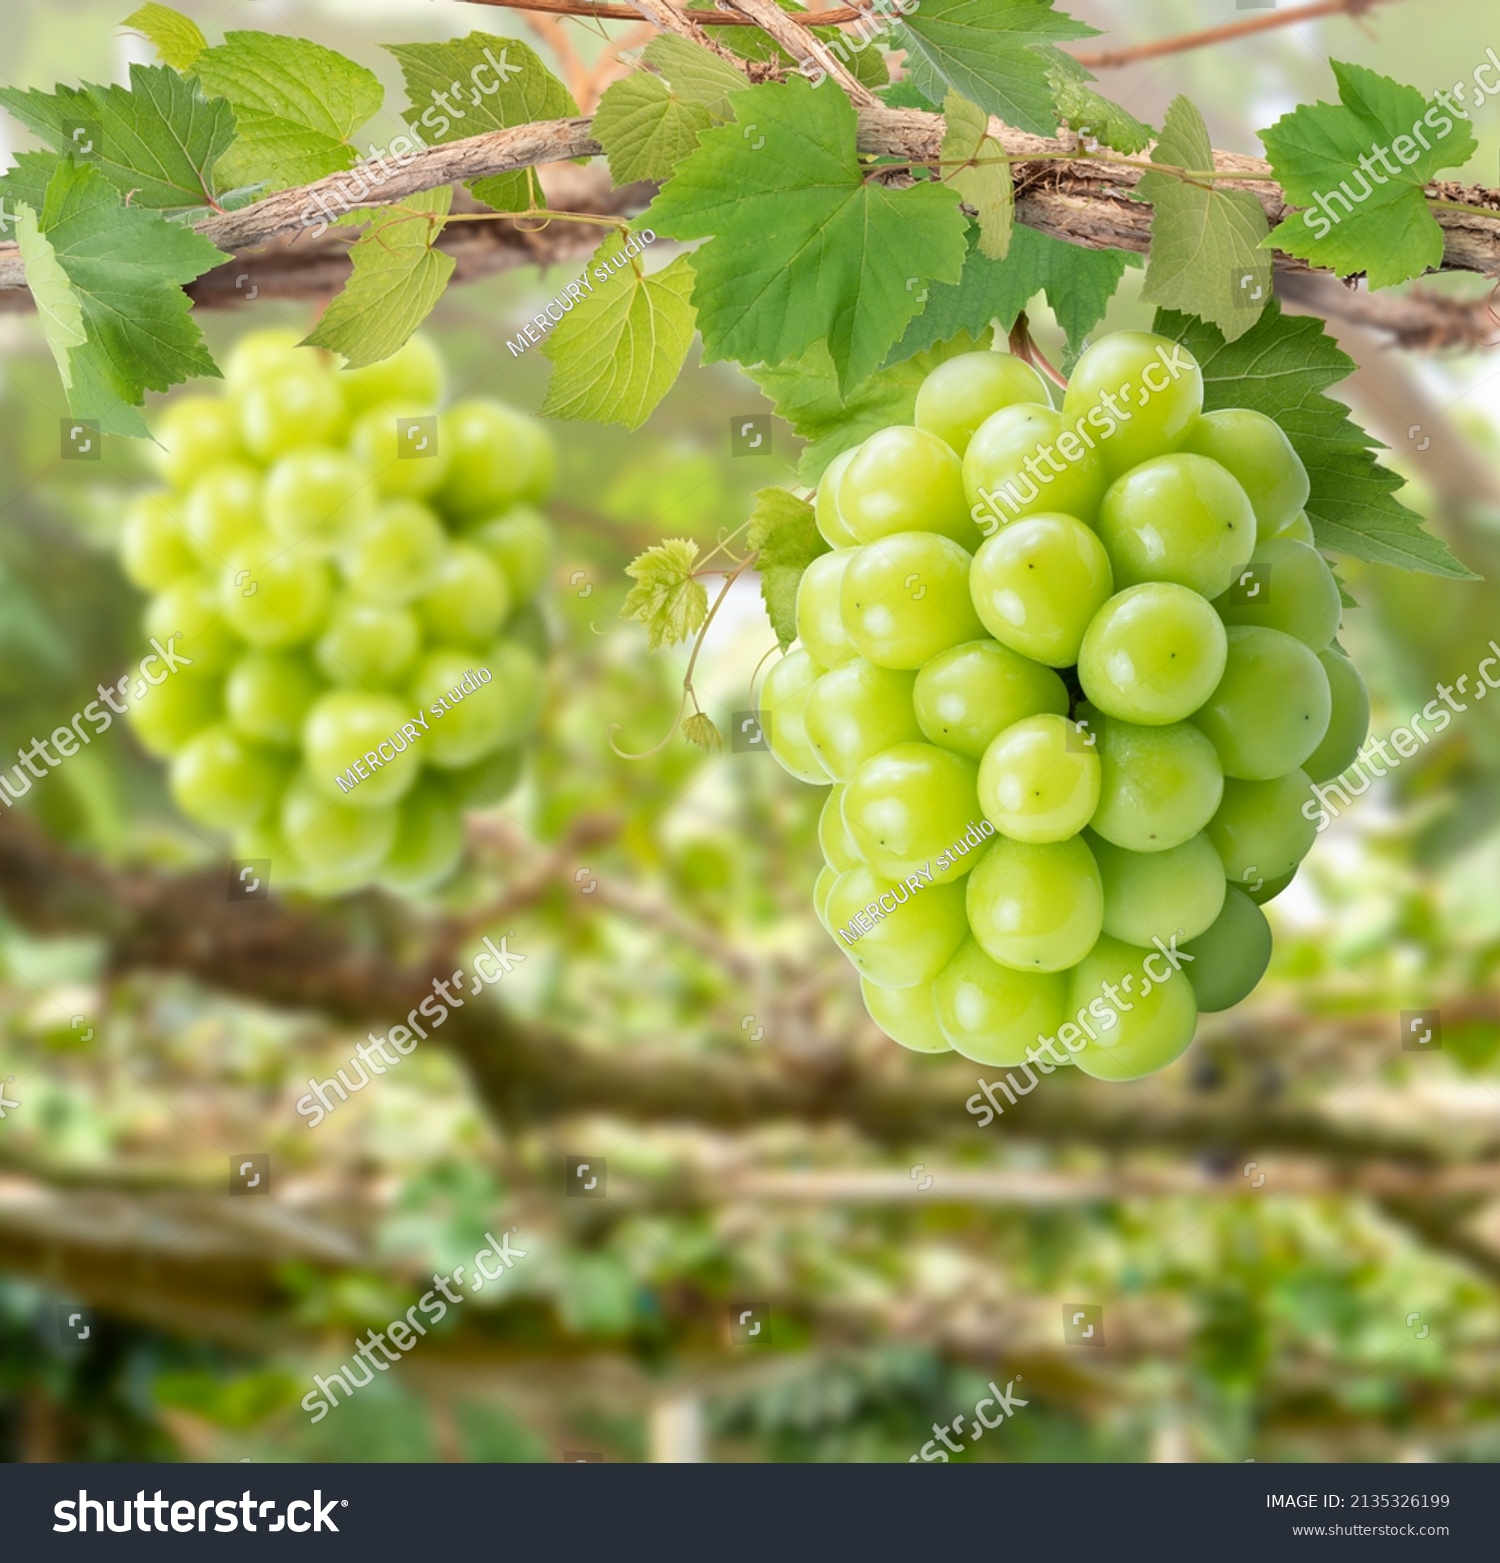 Sweet green grape on a branch over green natural garden Blur background, Bunch of Shine Muscat Grape with leaves in blur background. #2135326199